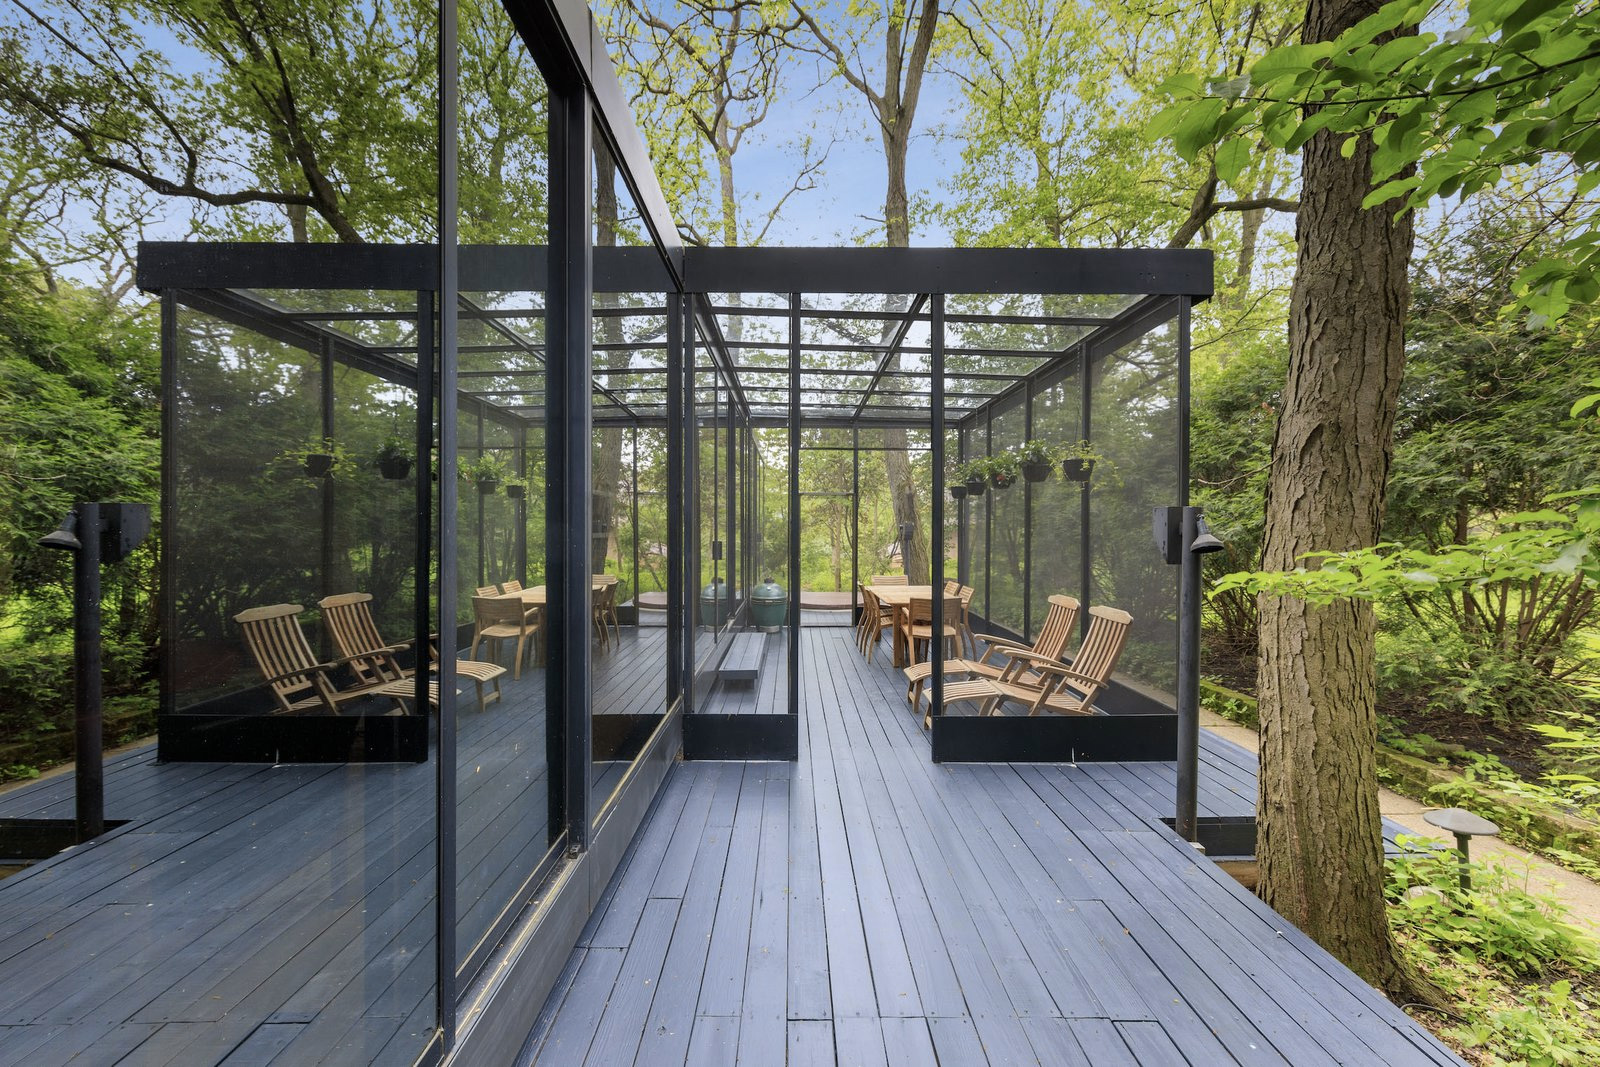 Live like an architect at this Mies-inspired glass and steel home